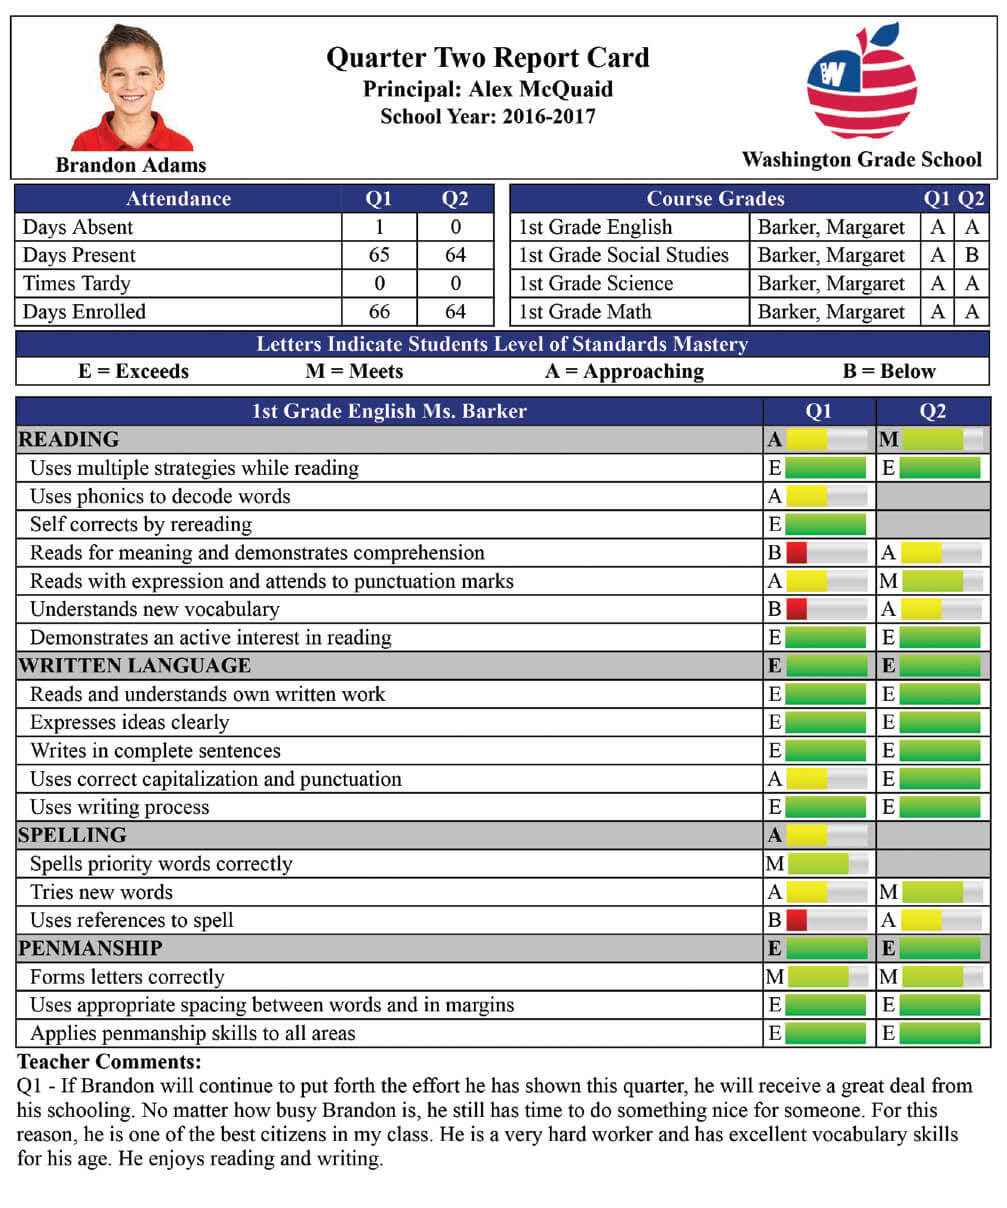 Report Card Creator Plugin For Powerschool Sis – From Mba Pertaining To Powerschool Reports Templates